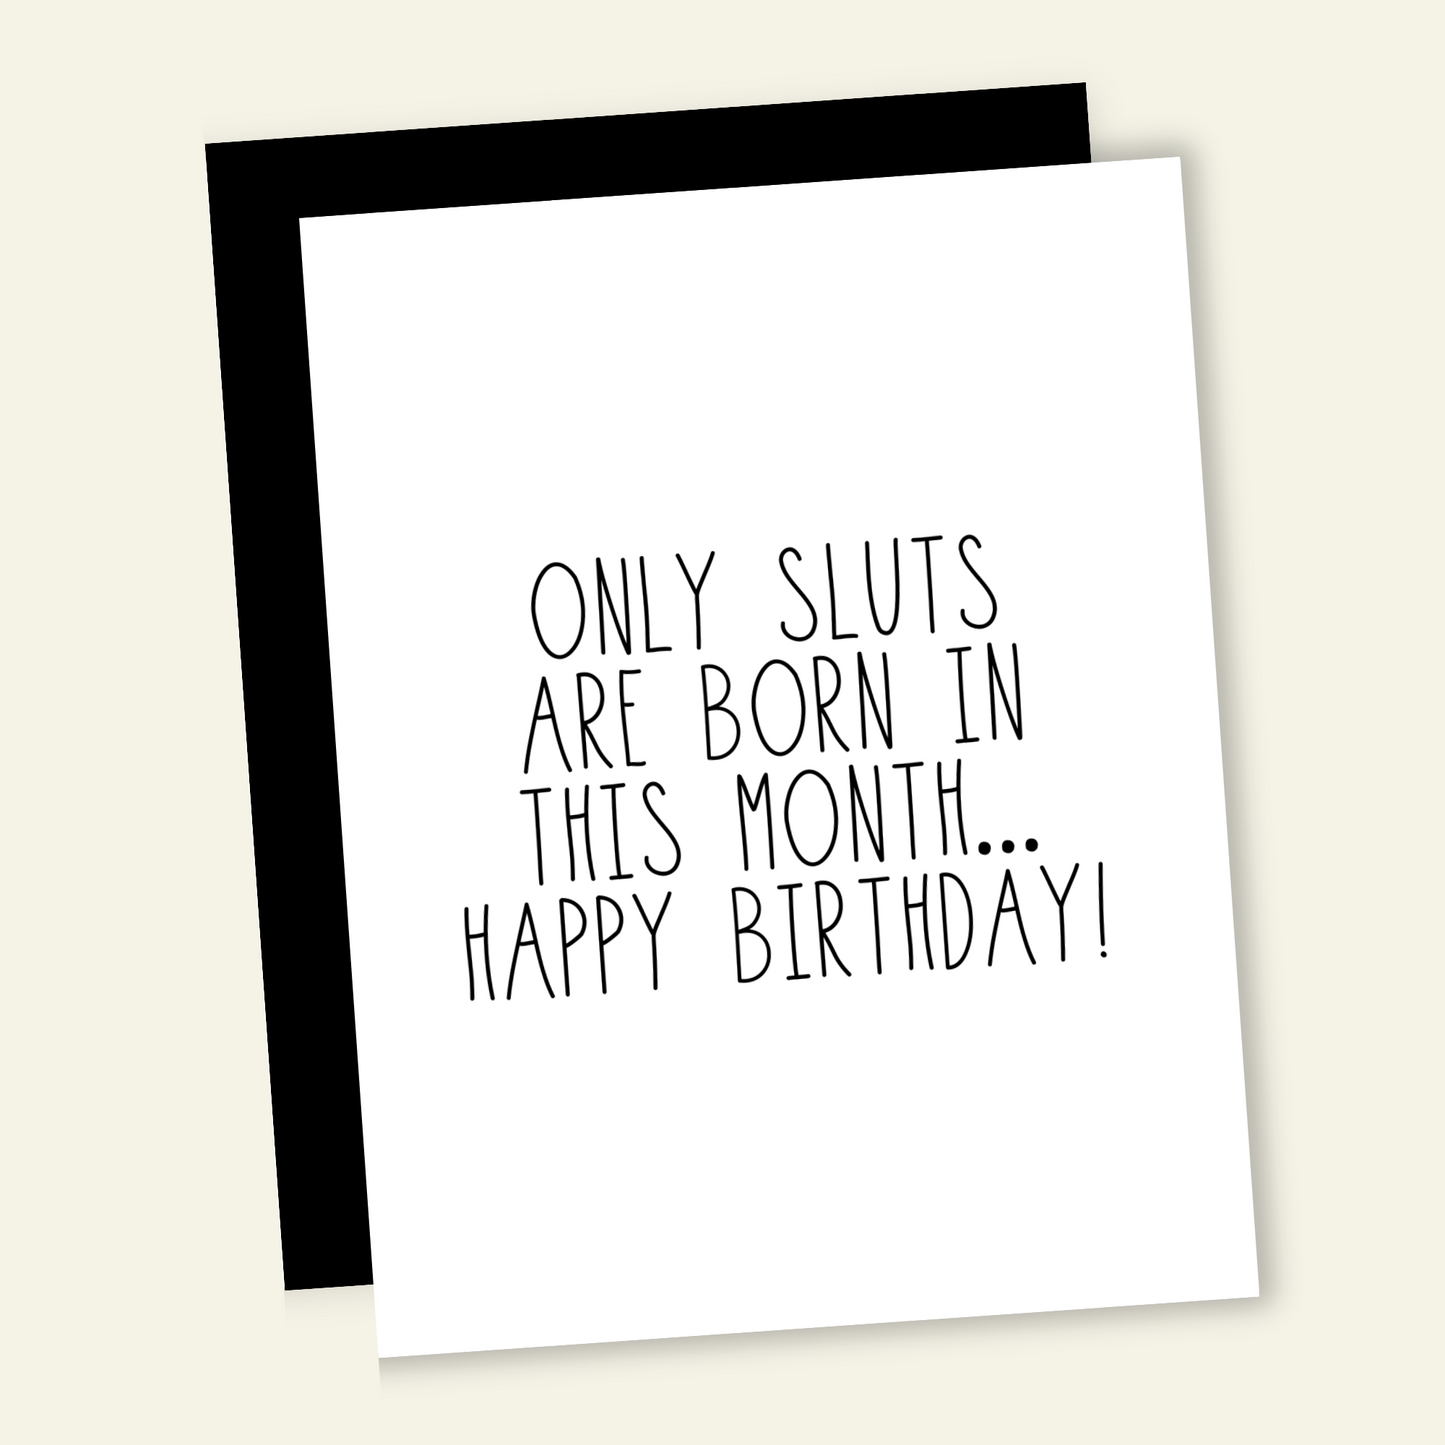 Only Slu*s Are Born In This Month... Birthday Card